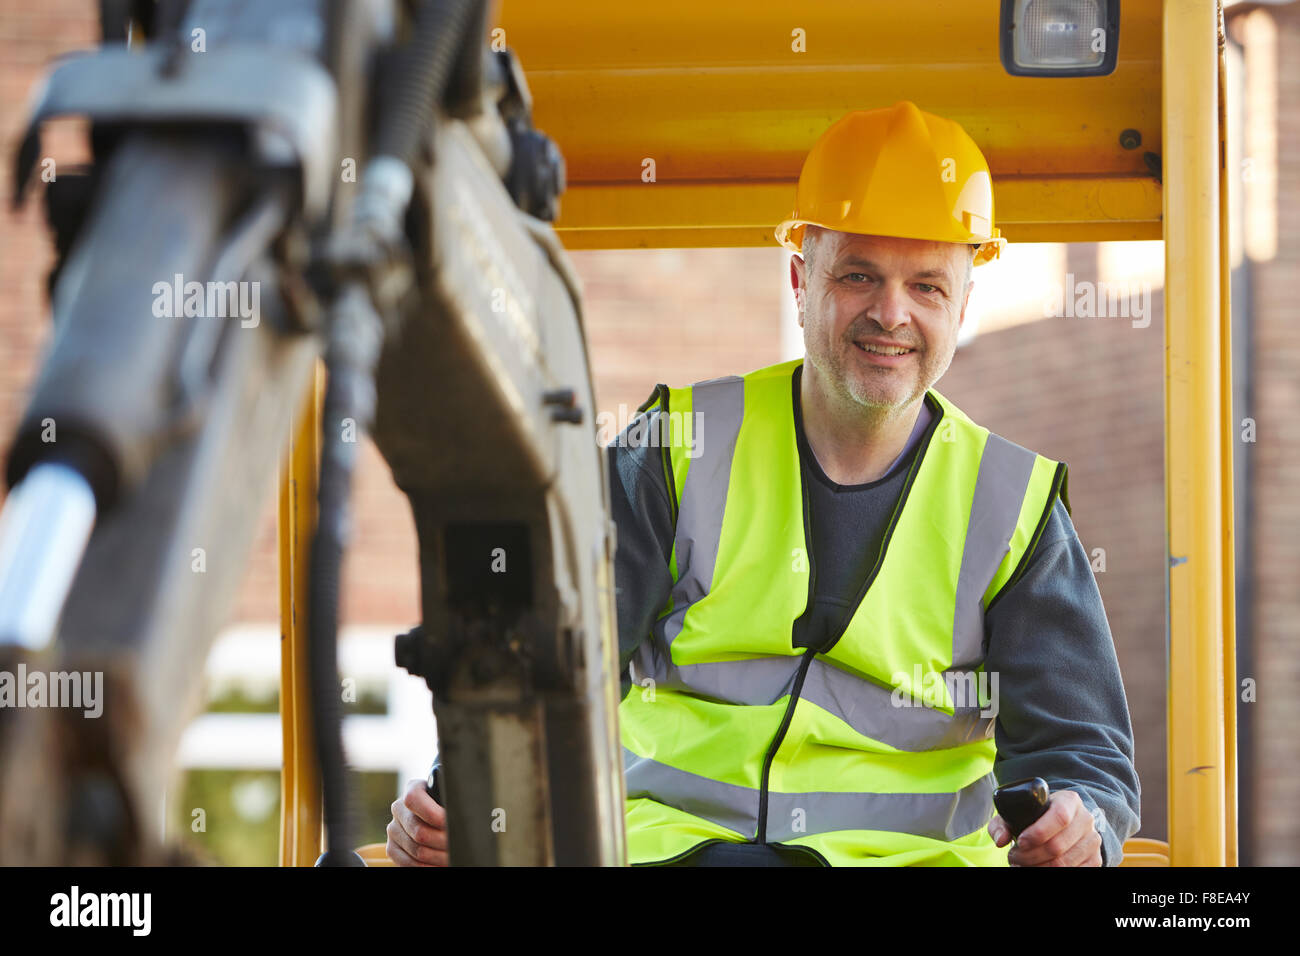 Construction Worker Operating Digger On Site Stock Photo